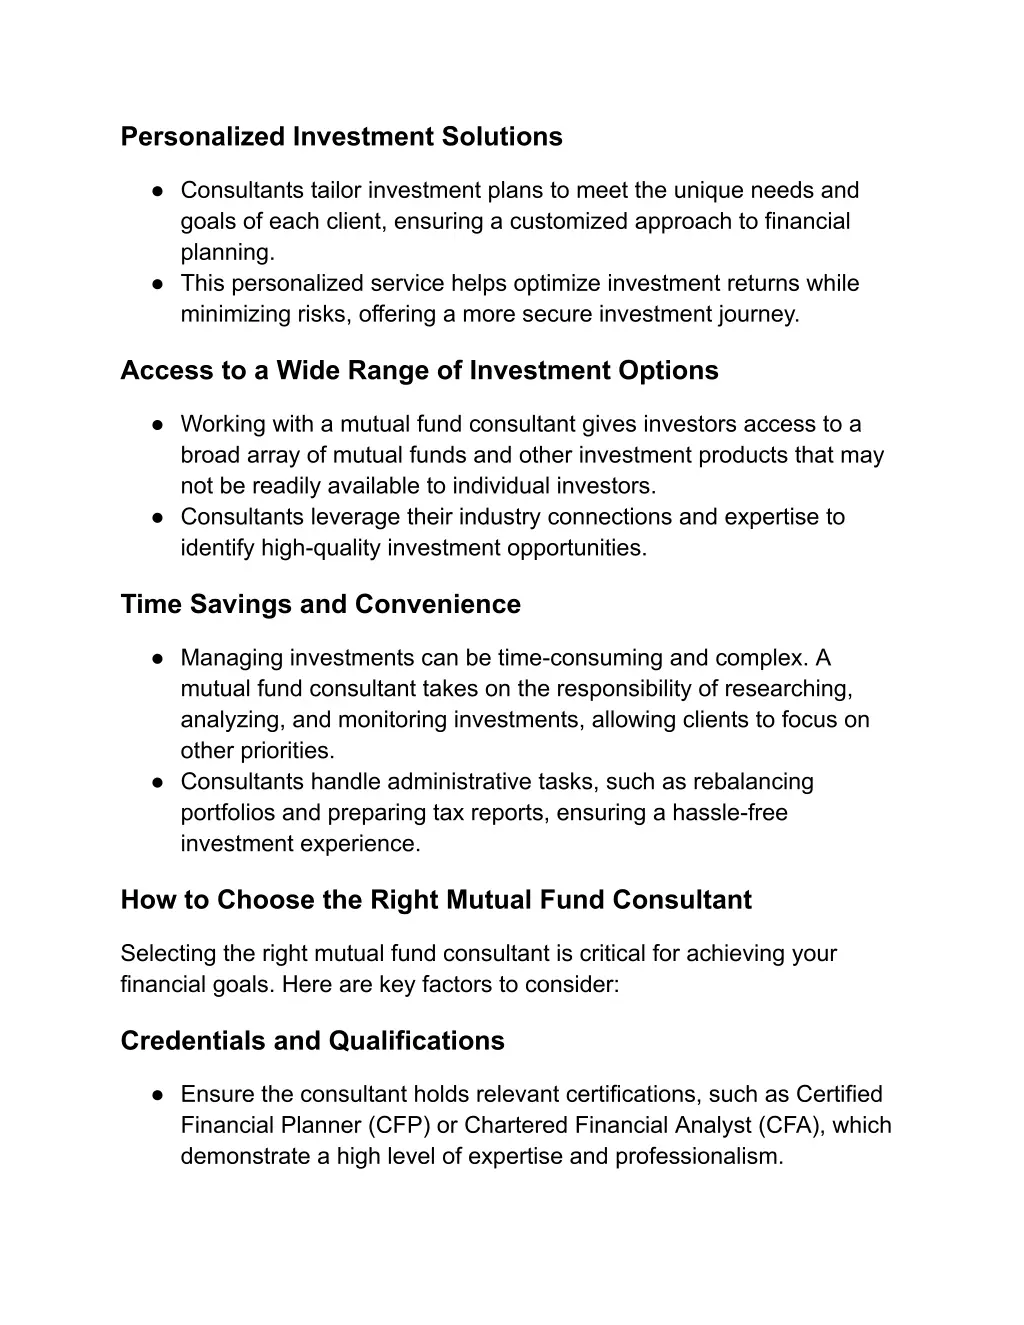 personalized investment solutions